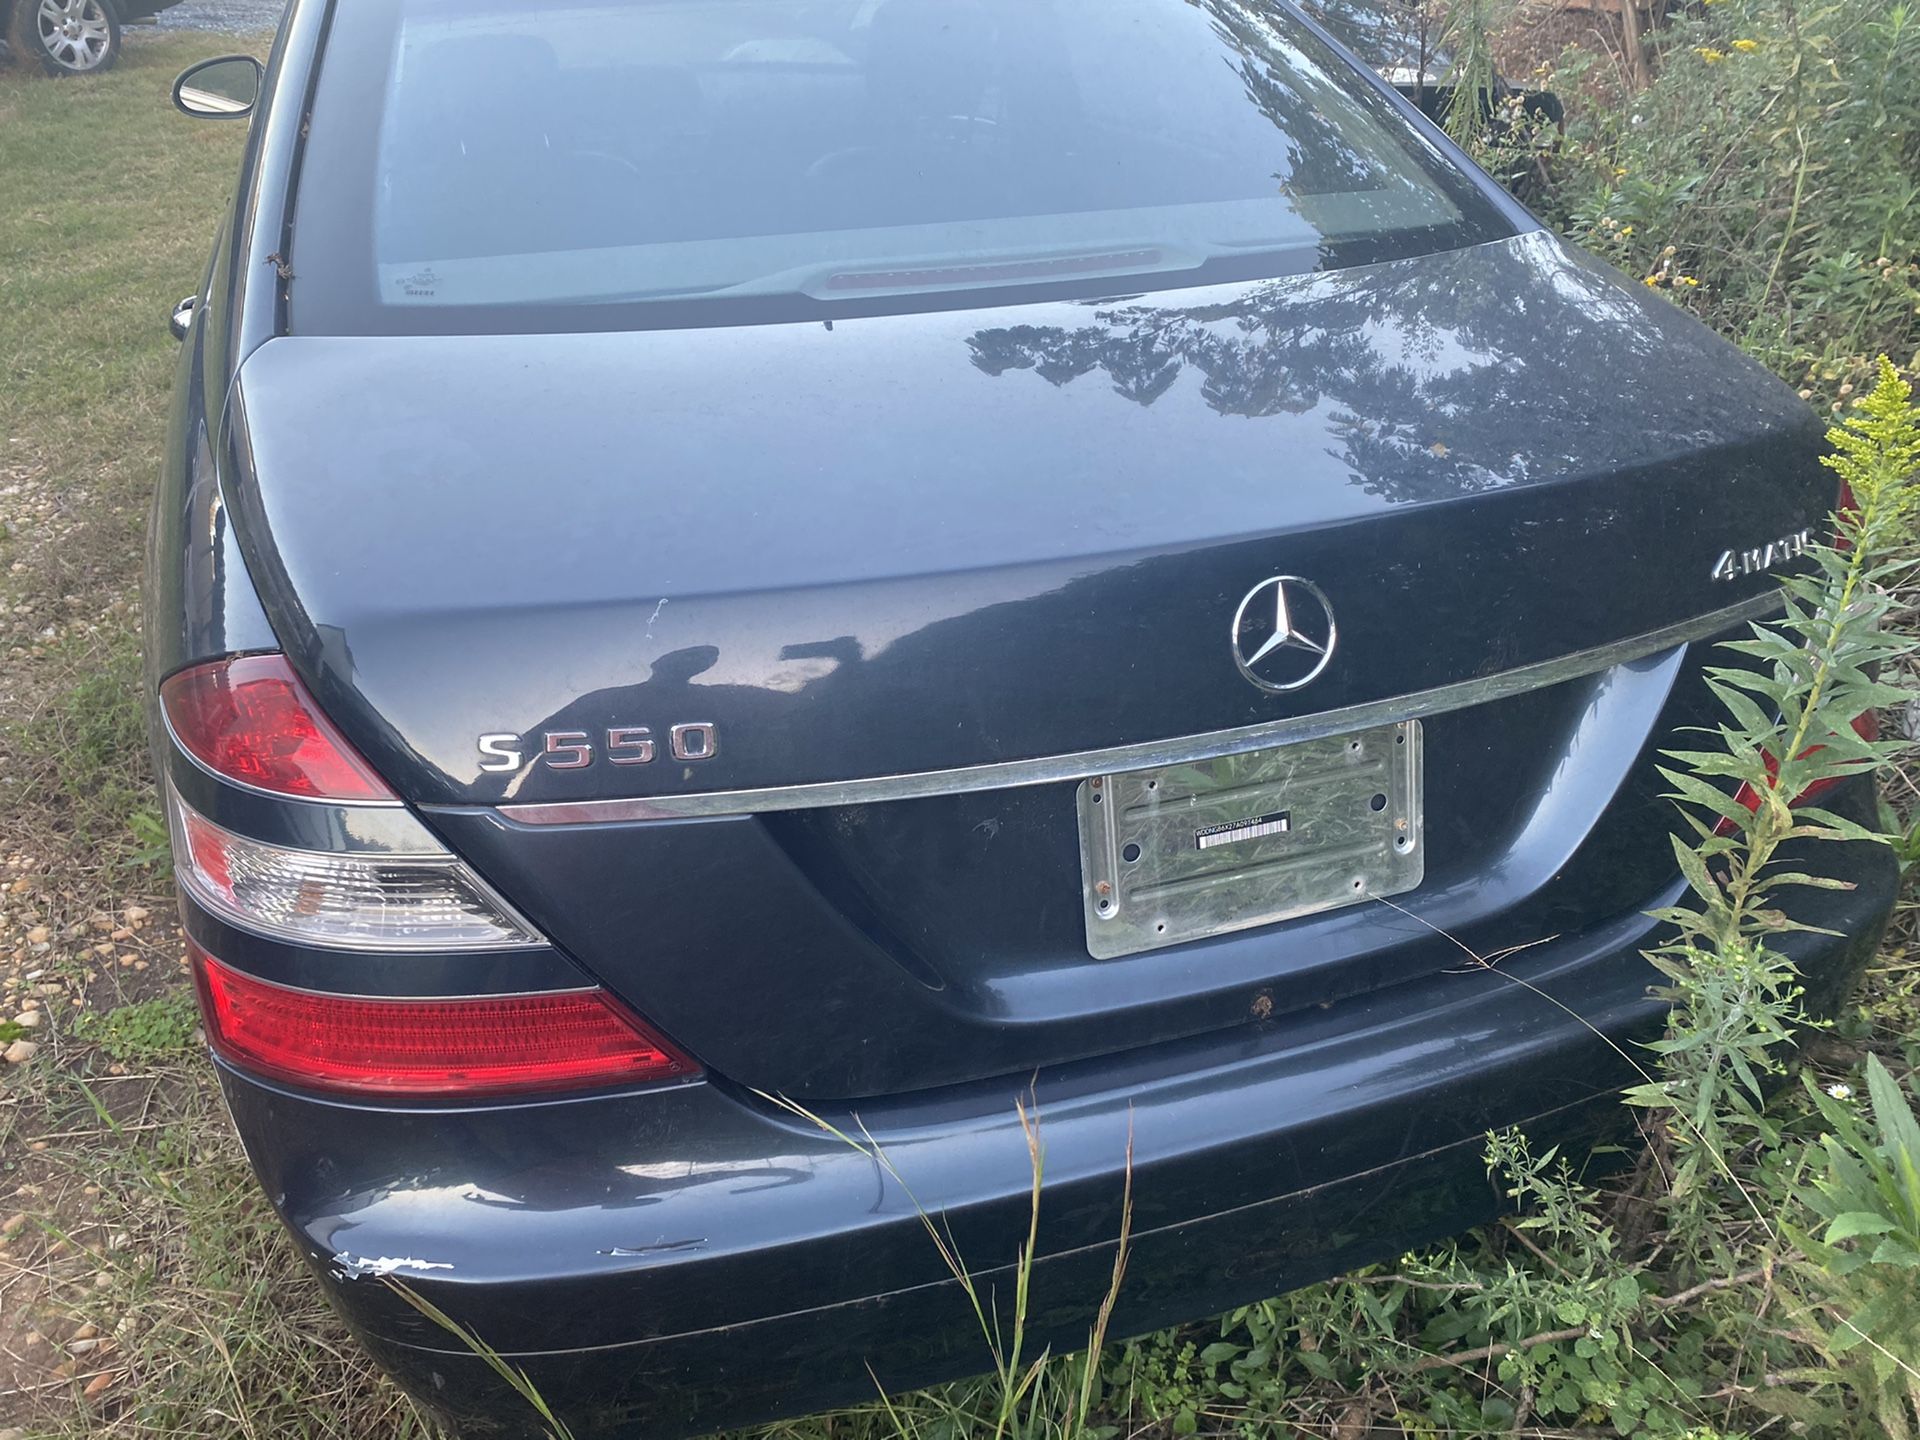 Mercedes S550 4 matic 2007 parts only